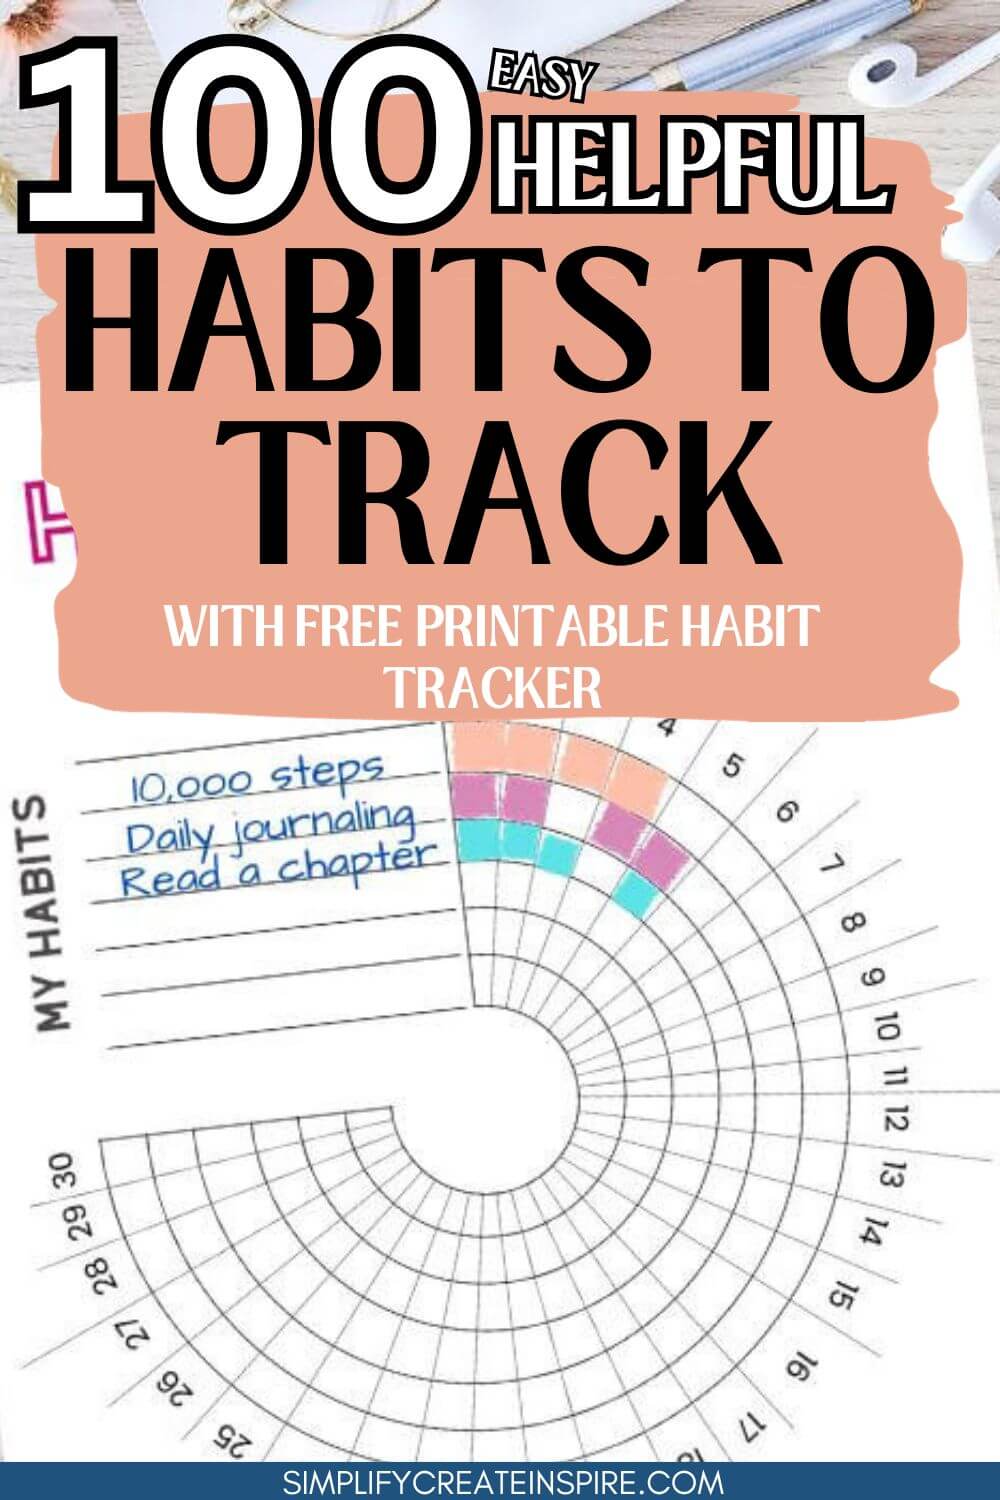 100 habits to track with a free printable habit tracker.